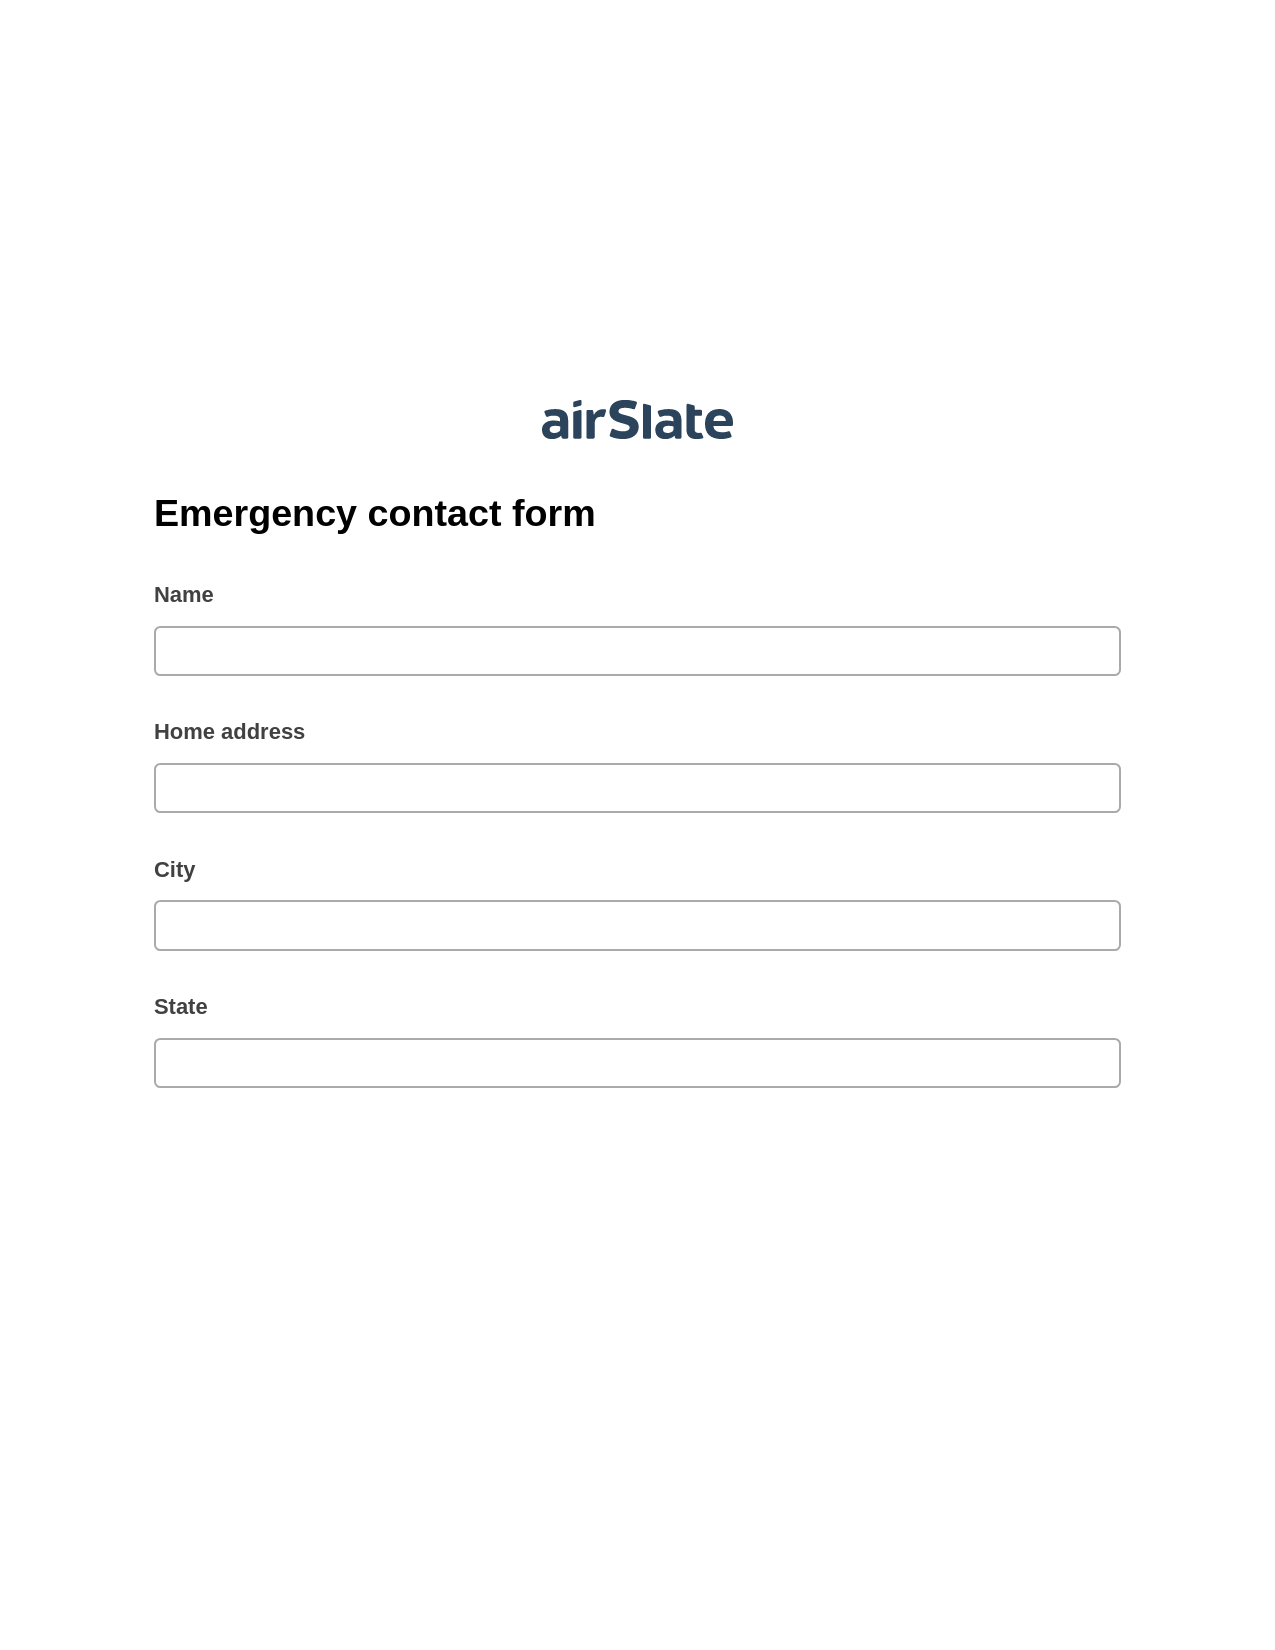 Multirole Emergency contact form Pre-fill Slate from MS Dynamics 365 Records Bot, Mailchimp add recipient to audience Bot, Export to Google Sheet Bot